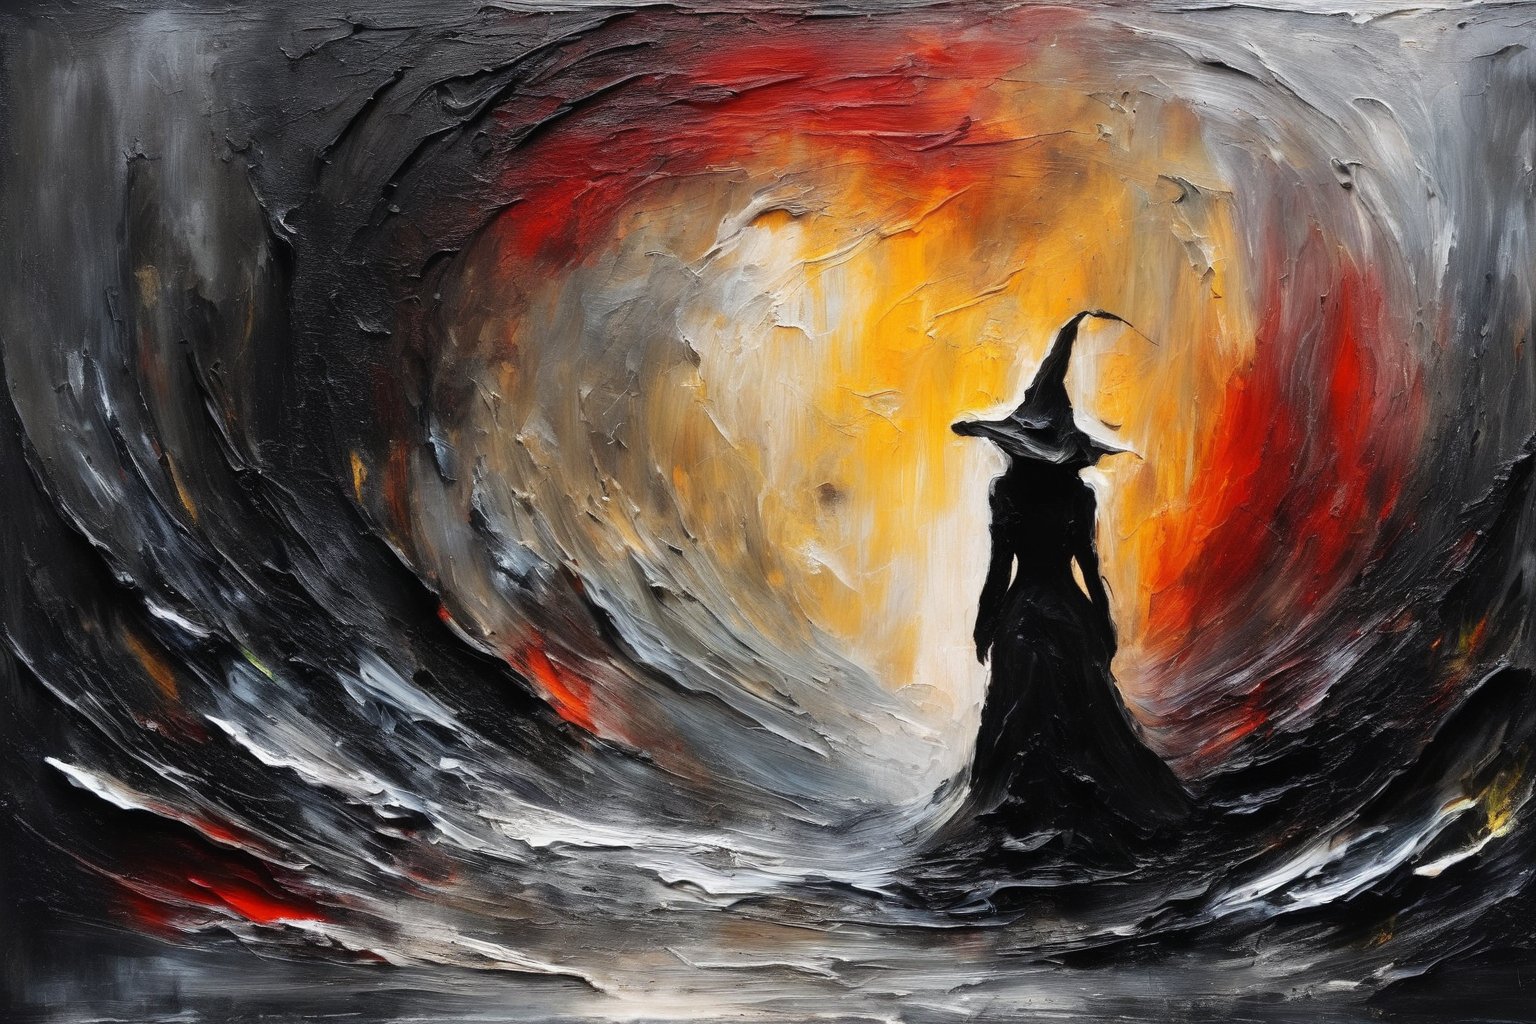 a hyper abstract painting of ((a lady made out of thick paint)), with her back to the camera, wearing a black pointy wizard hat, at the gates of hell, using very heavy brush strokes, cracking paint, very heavy pallet knife work, thick paint, dried up paint, abstract